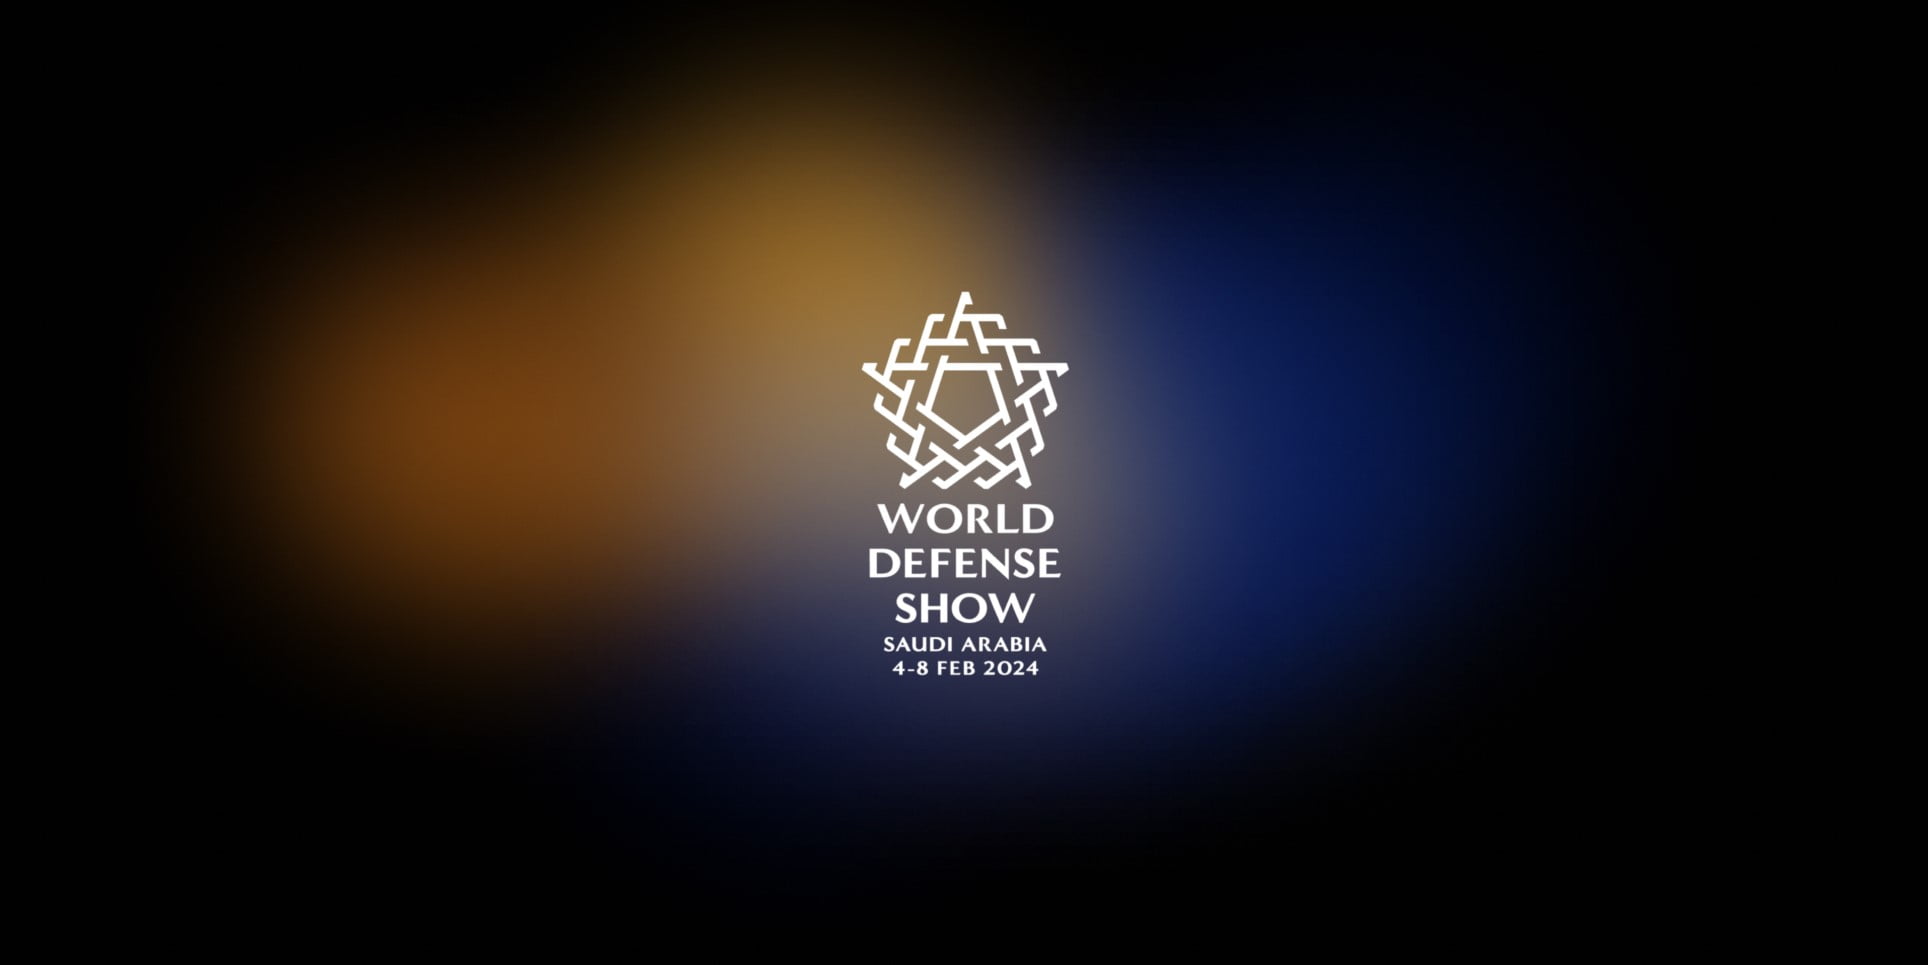 World defense show featuring Beyond Vision